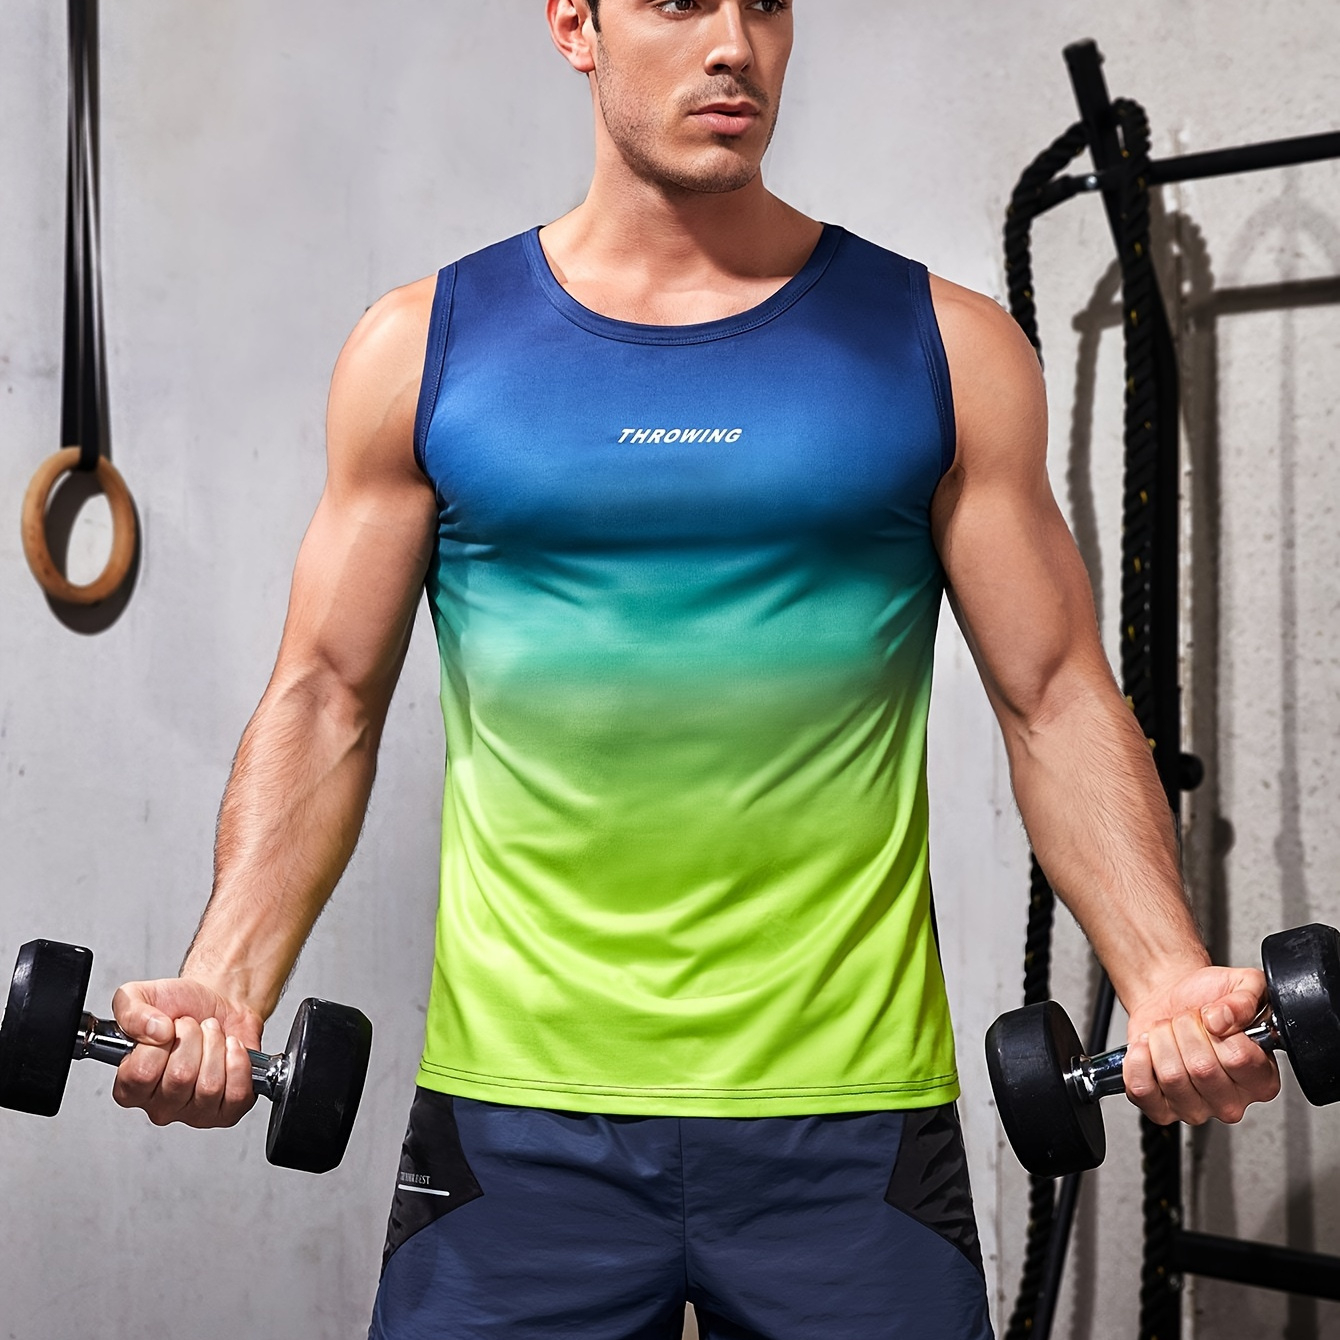 

Men's Ombre Tank Tops Summer Clothing Gym Bodybuilding Training Fitness Sleeveless Muscle T Shirts Slim Fit Workout Vest Tshirt Top